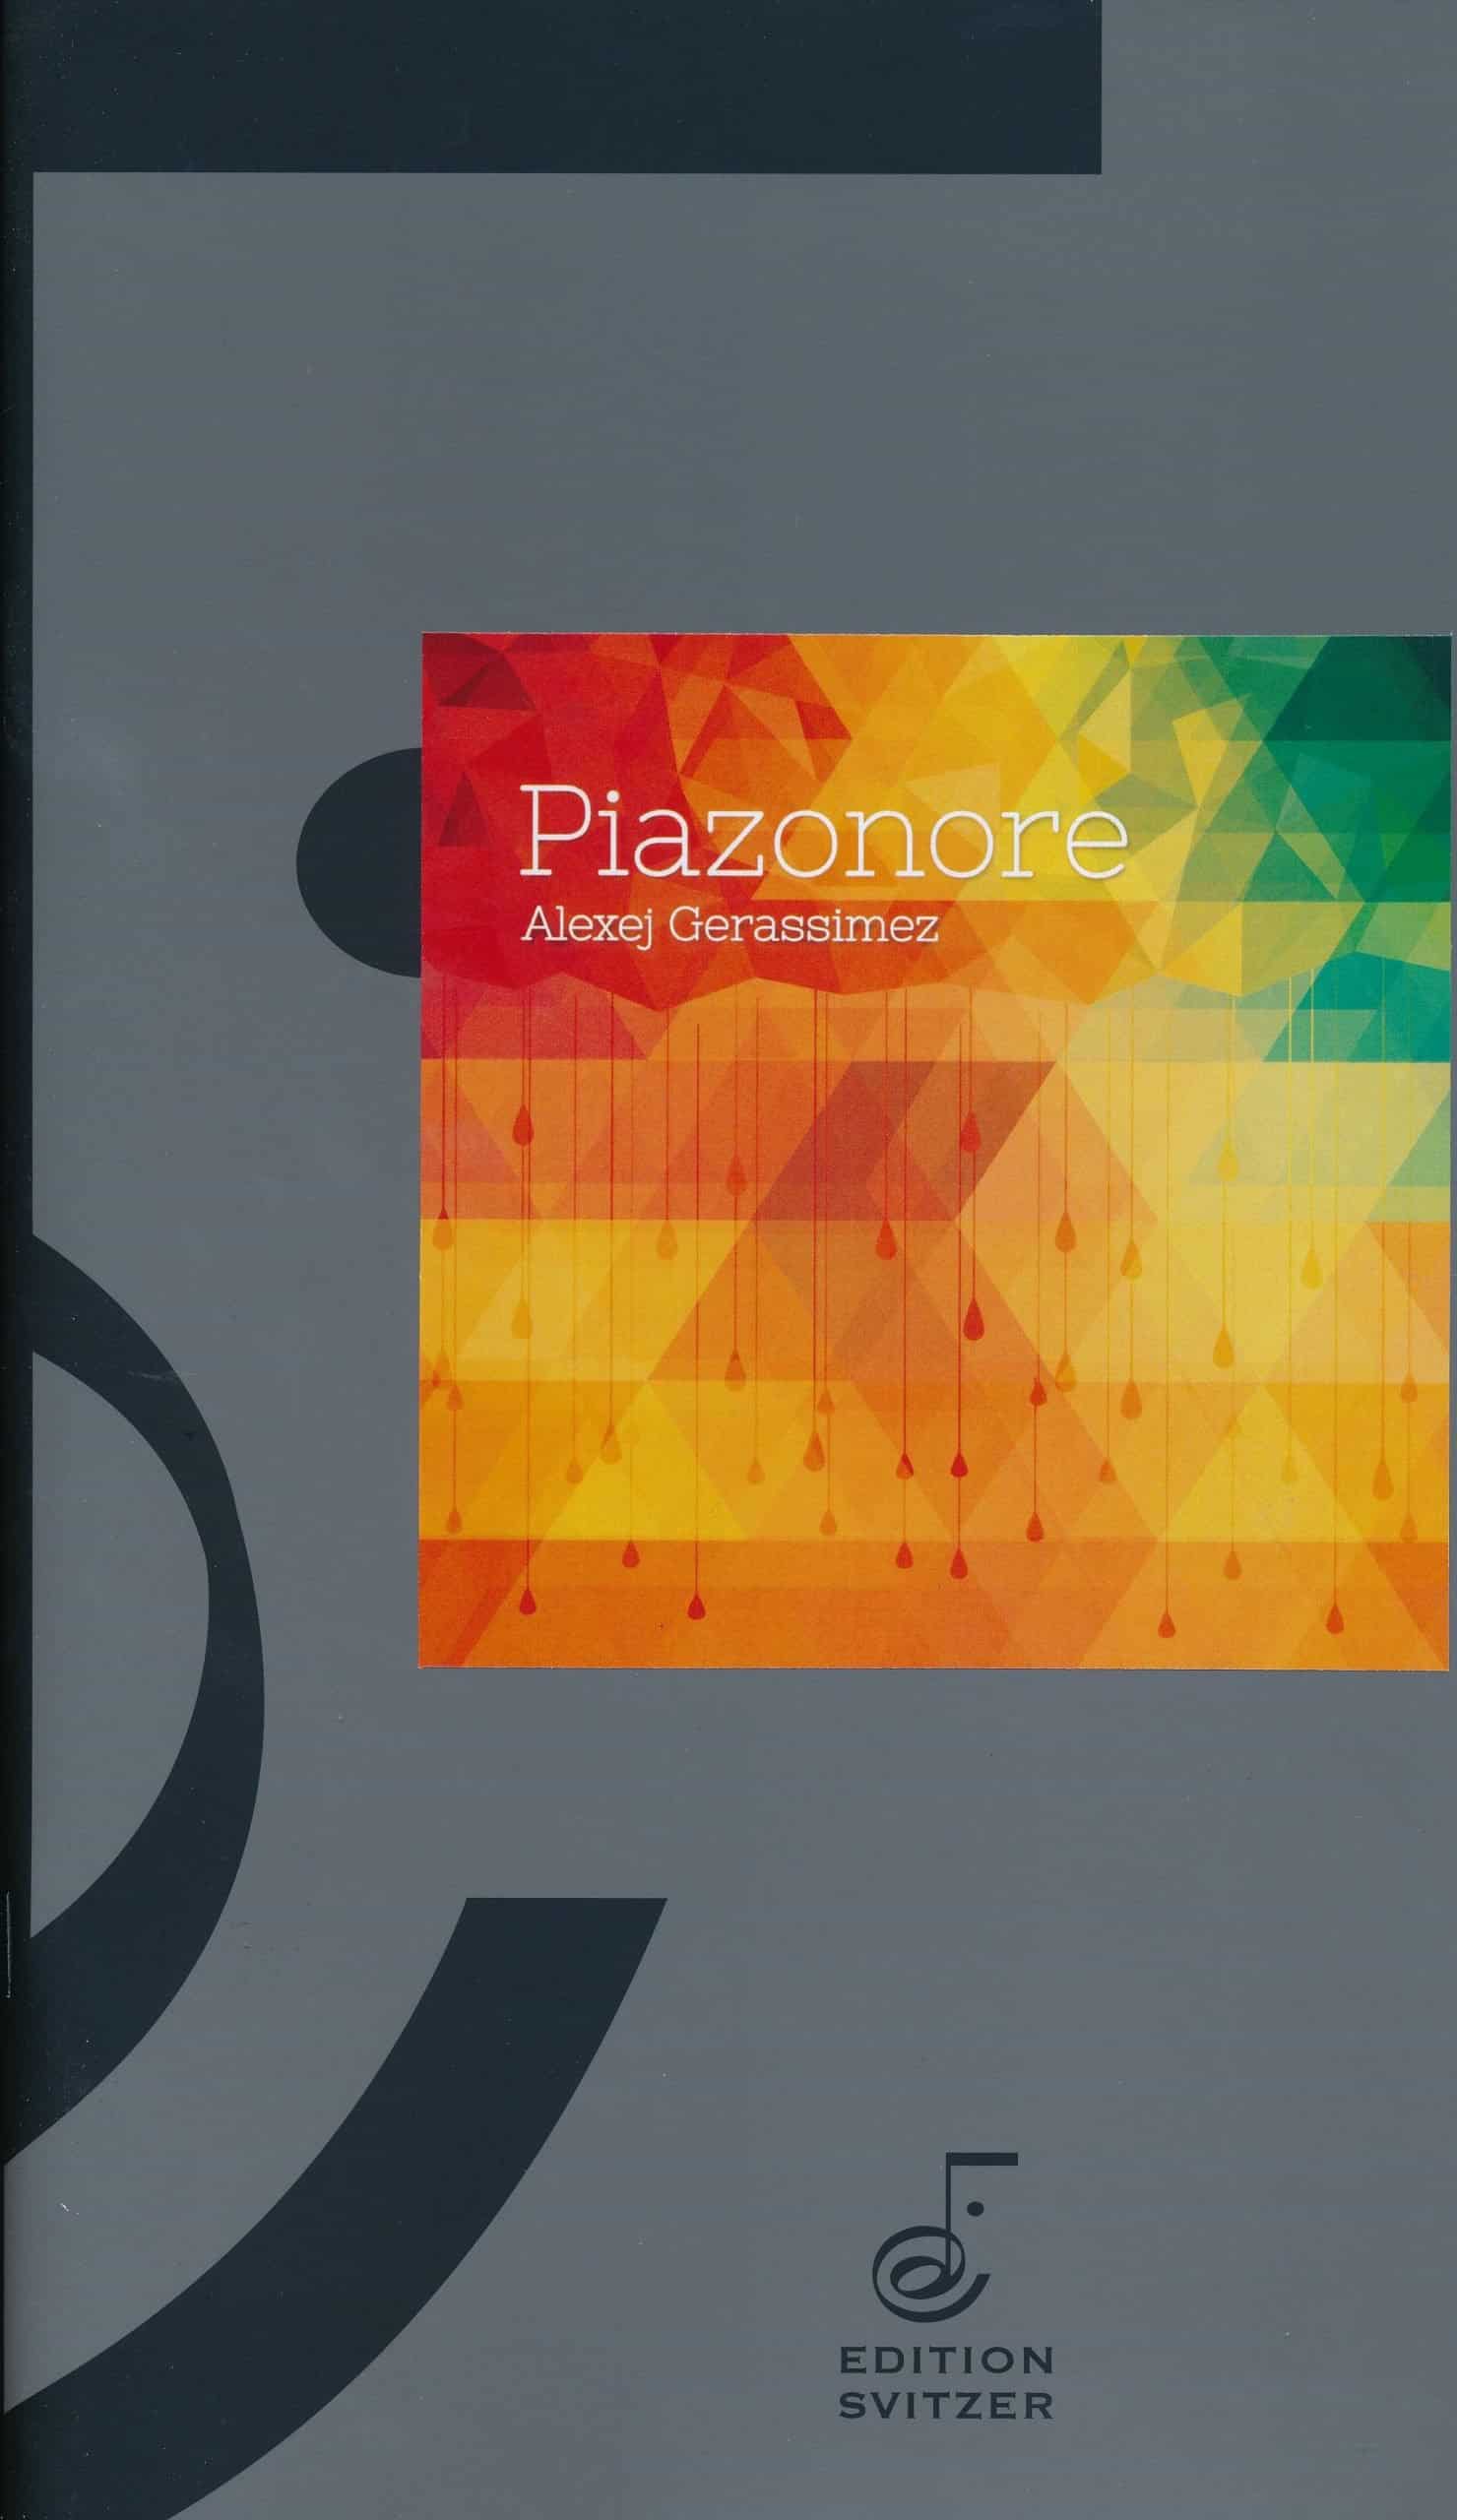 Piazonore